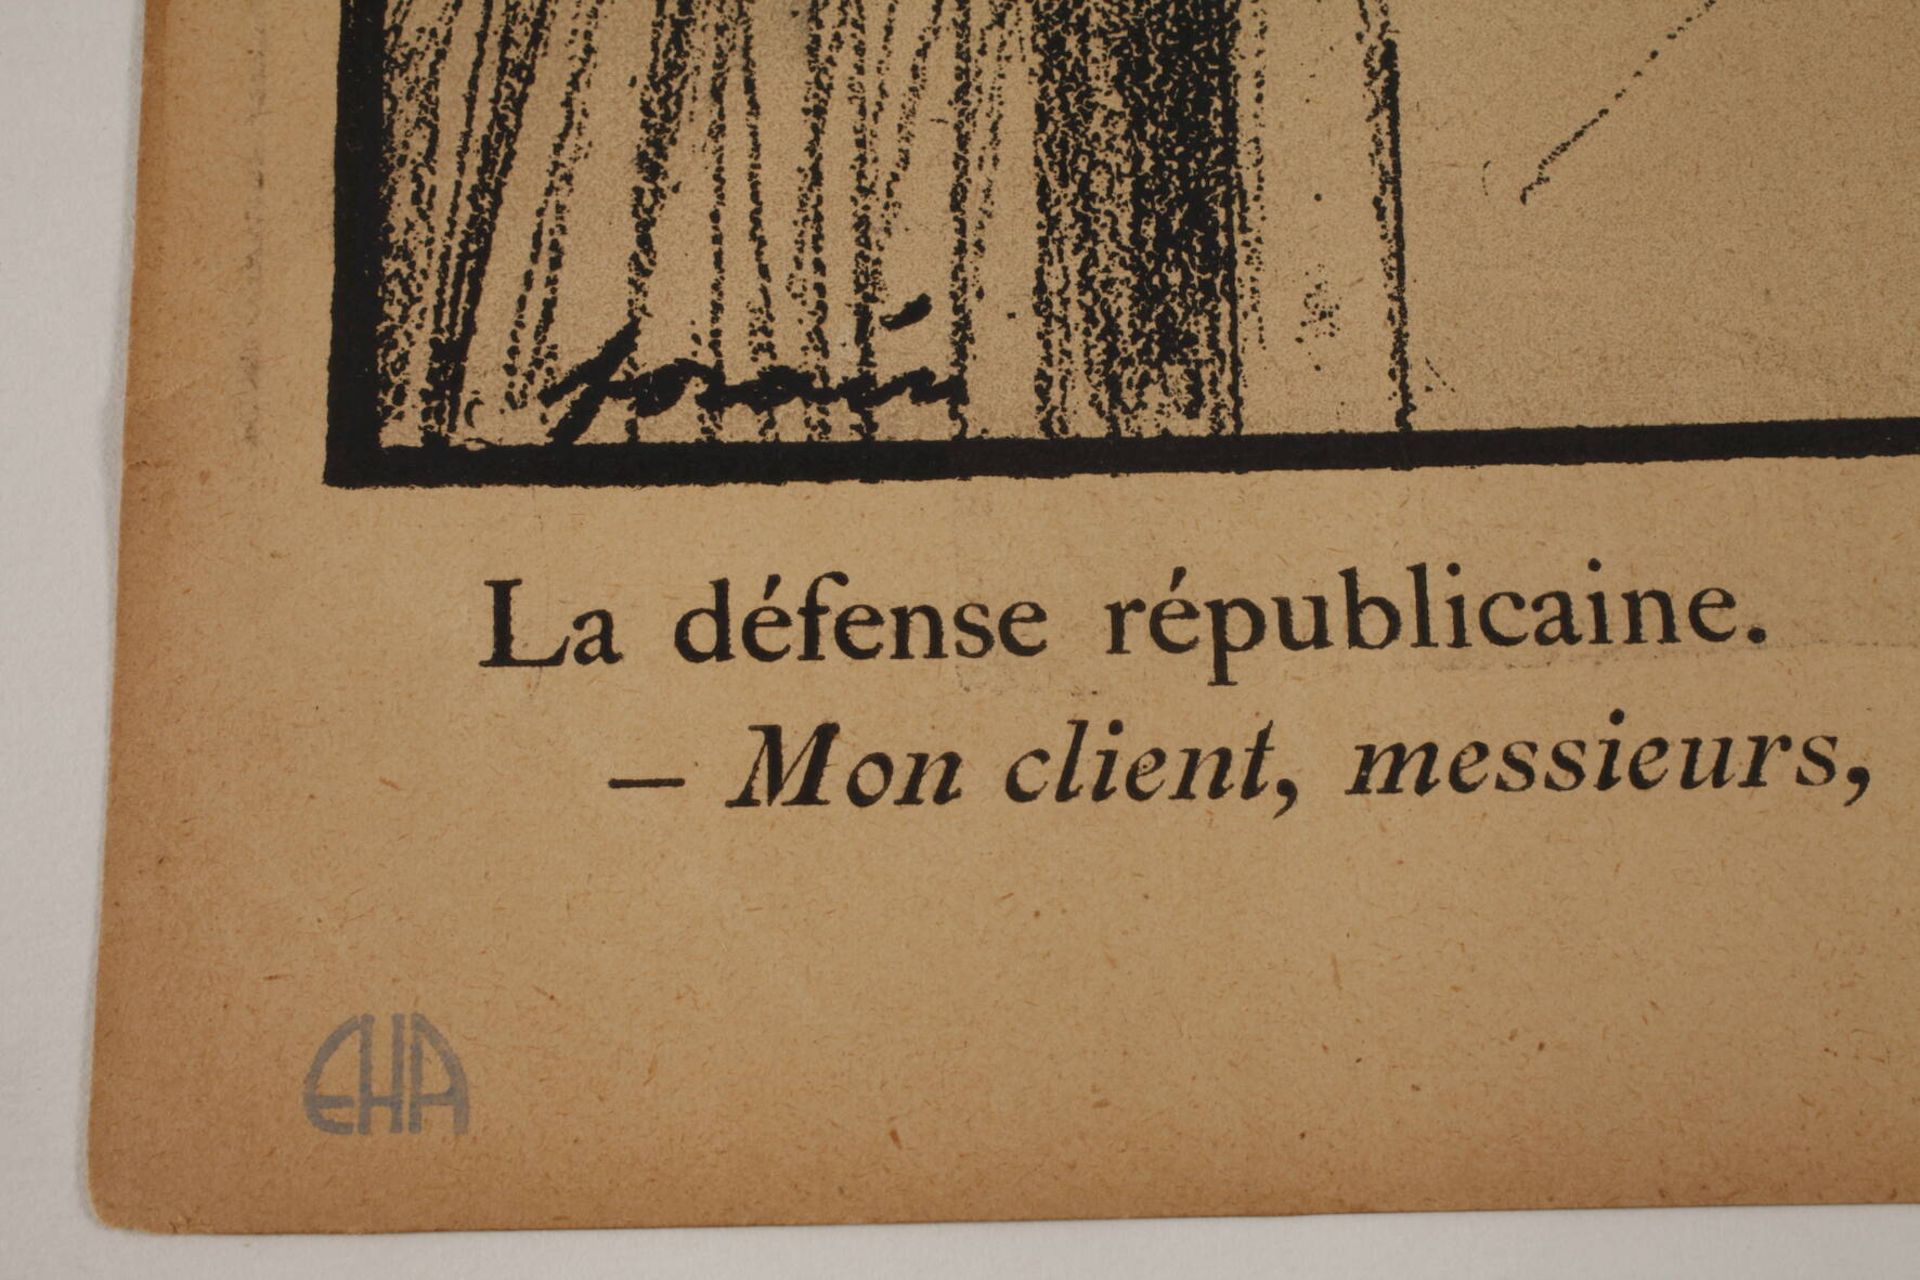 Le Rire, Journal humorisque - Image 3 of 3